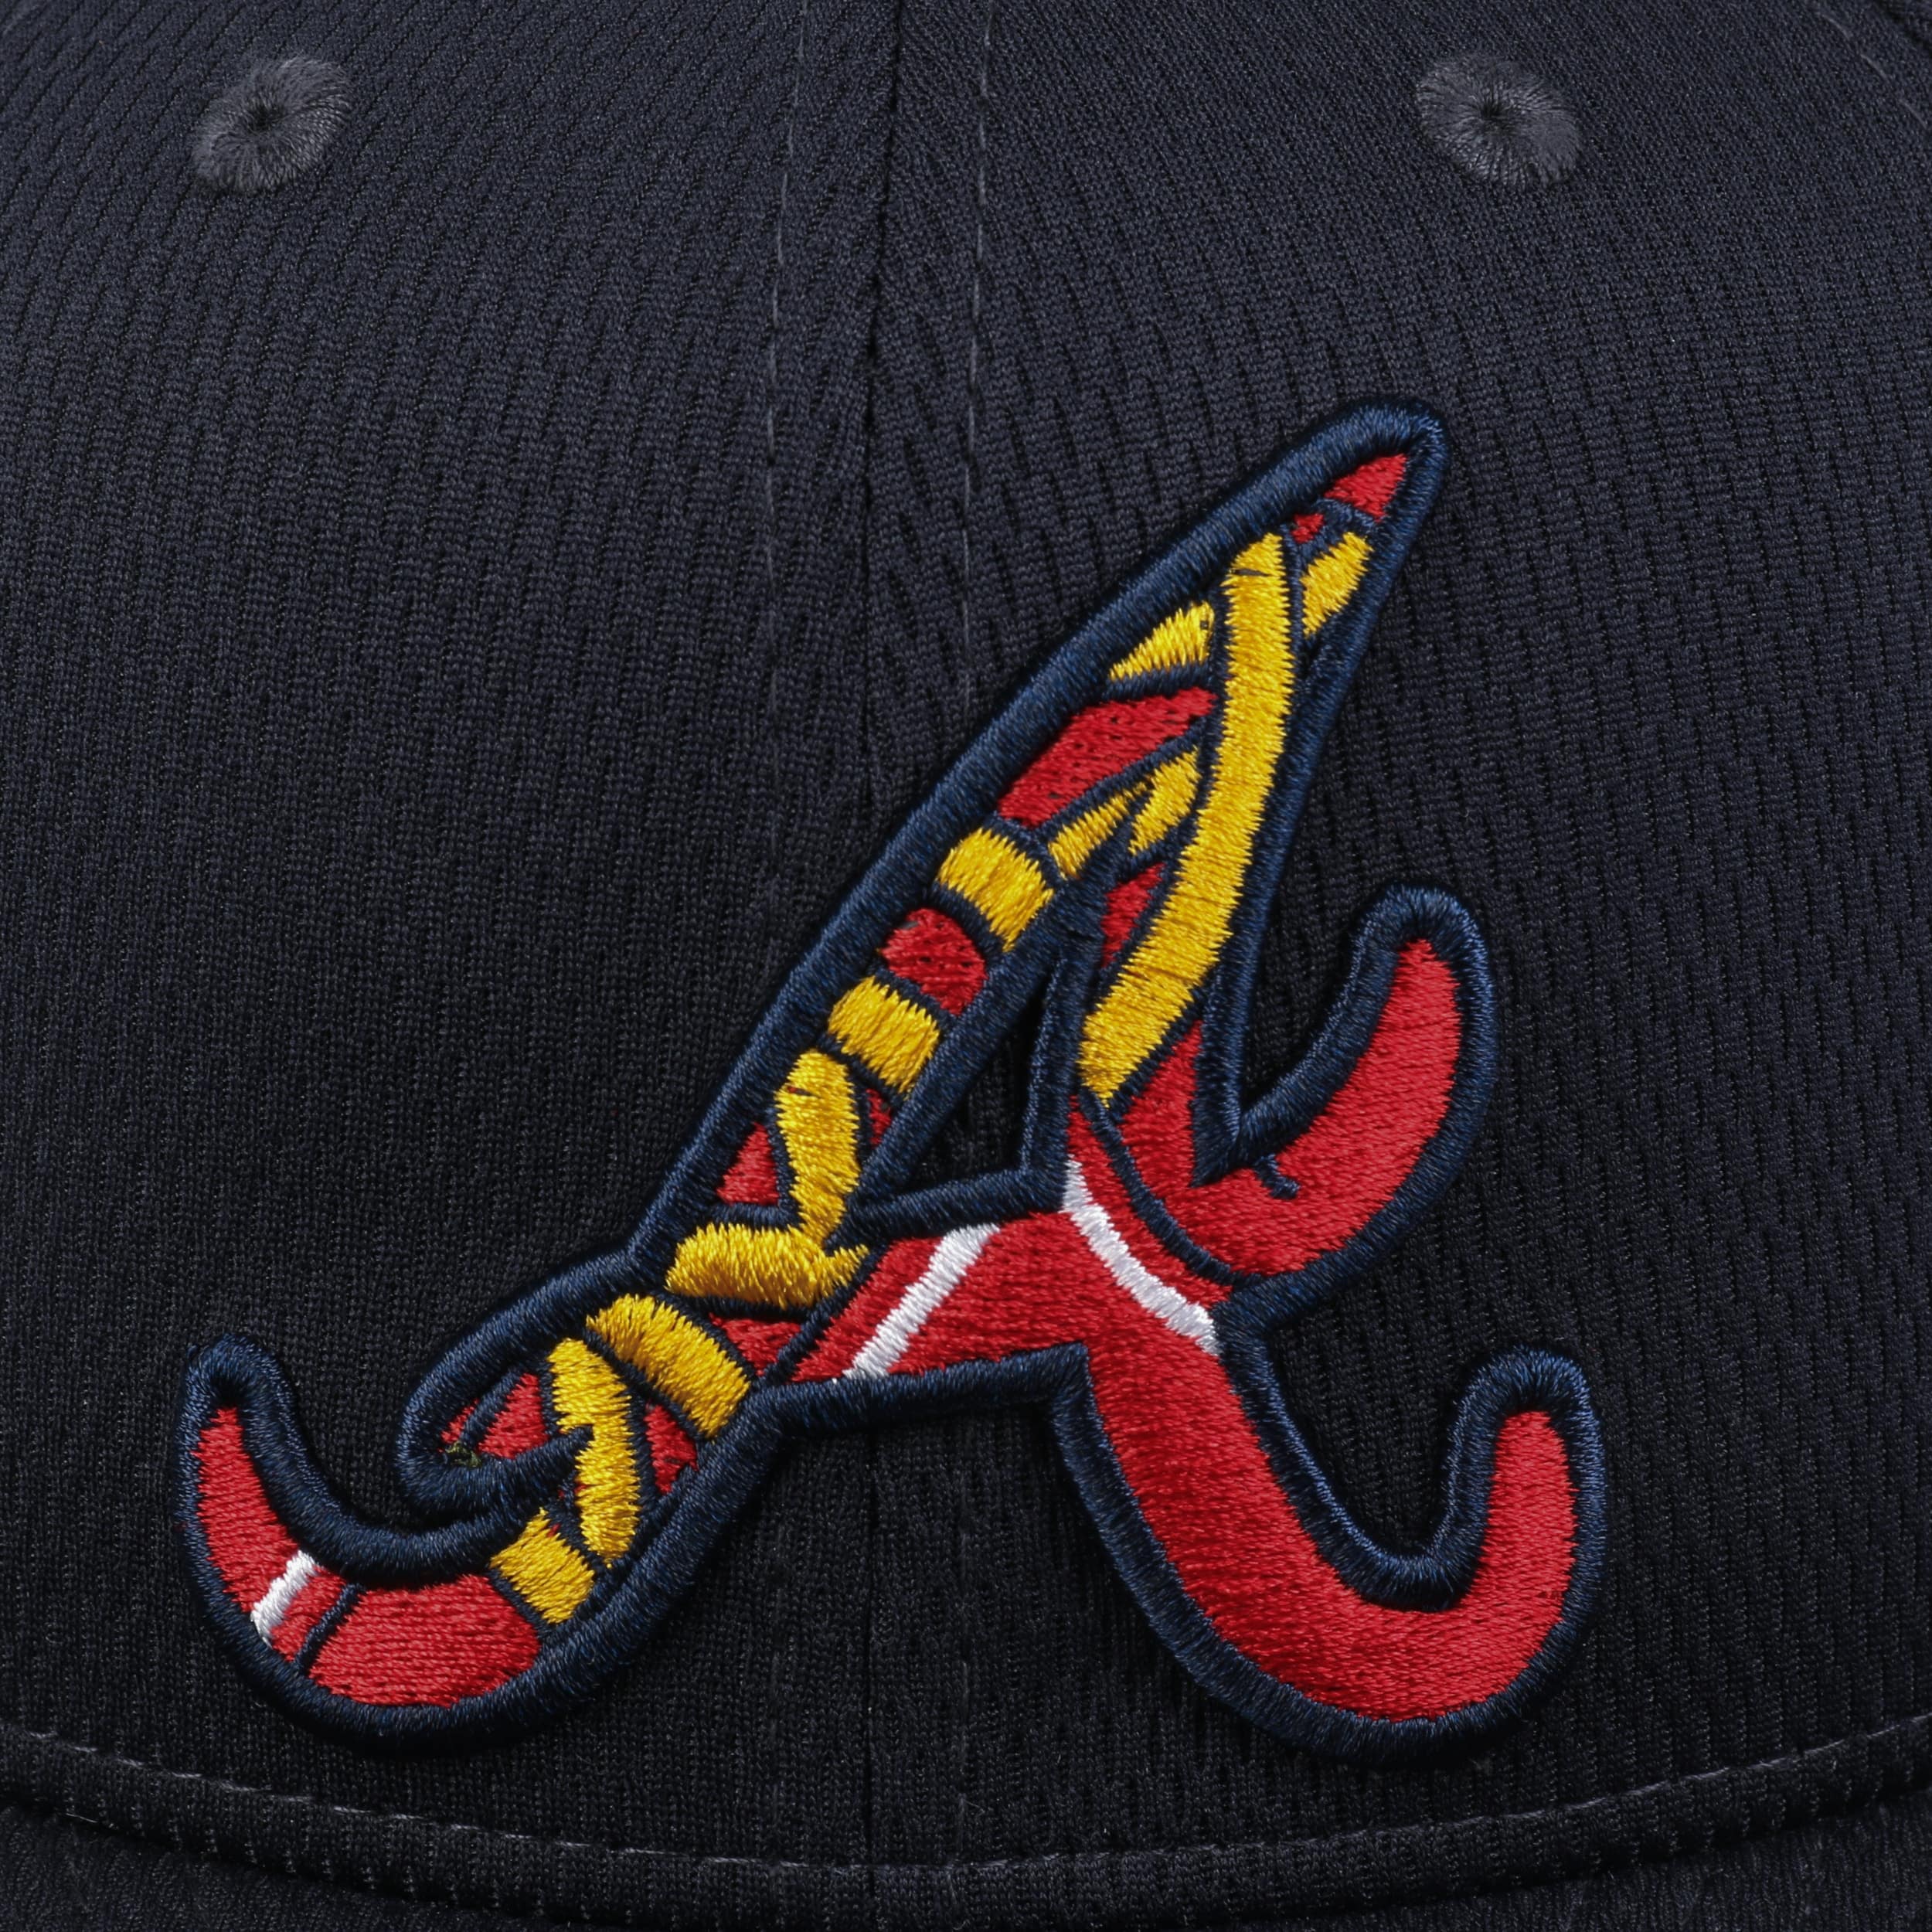 9Fifty Batting Practice Braves Cap by New Era - 42,95 €